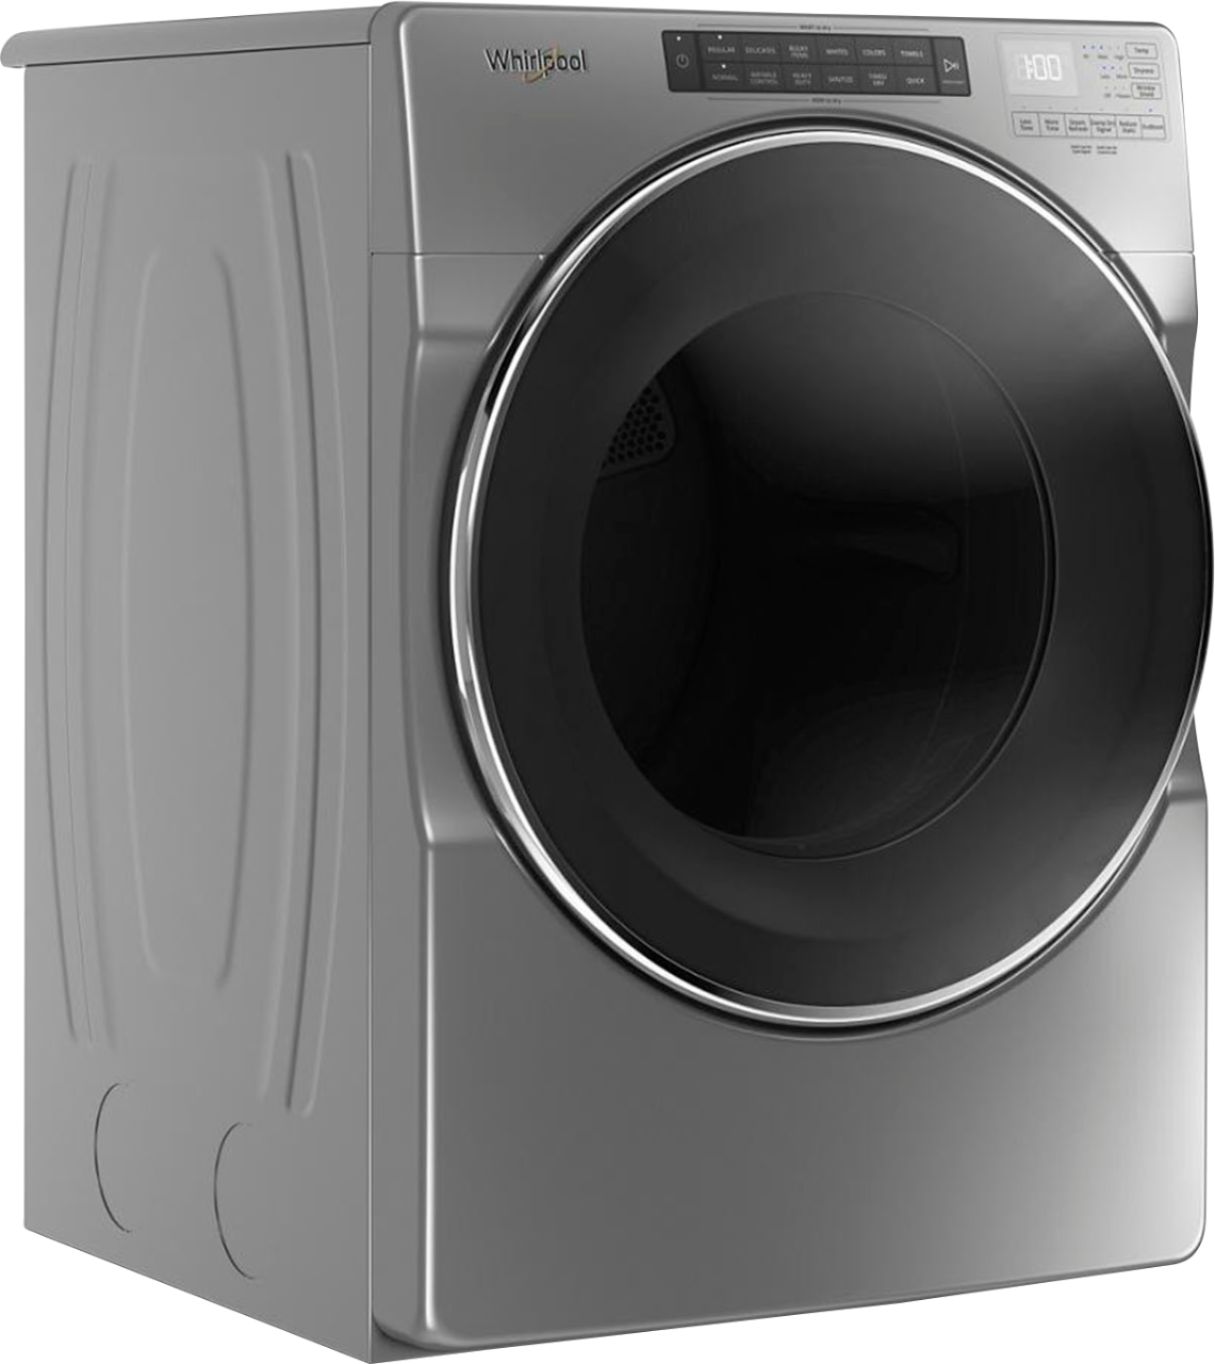 Angle View: Whirlpool - 7.4 Cu. Ft. Stackable Electric Dryer with Steam and Wrinkle Shield Plus Option - Chrome shadow